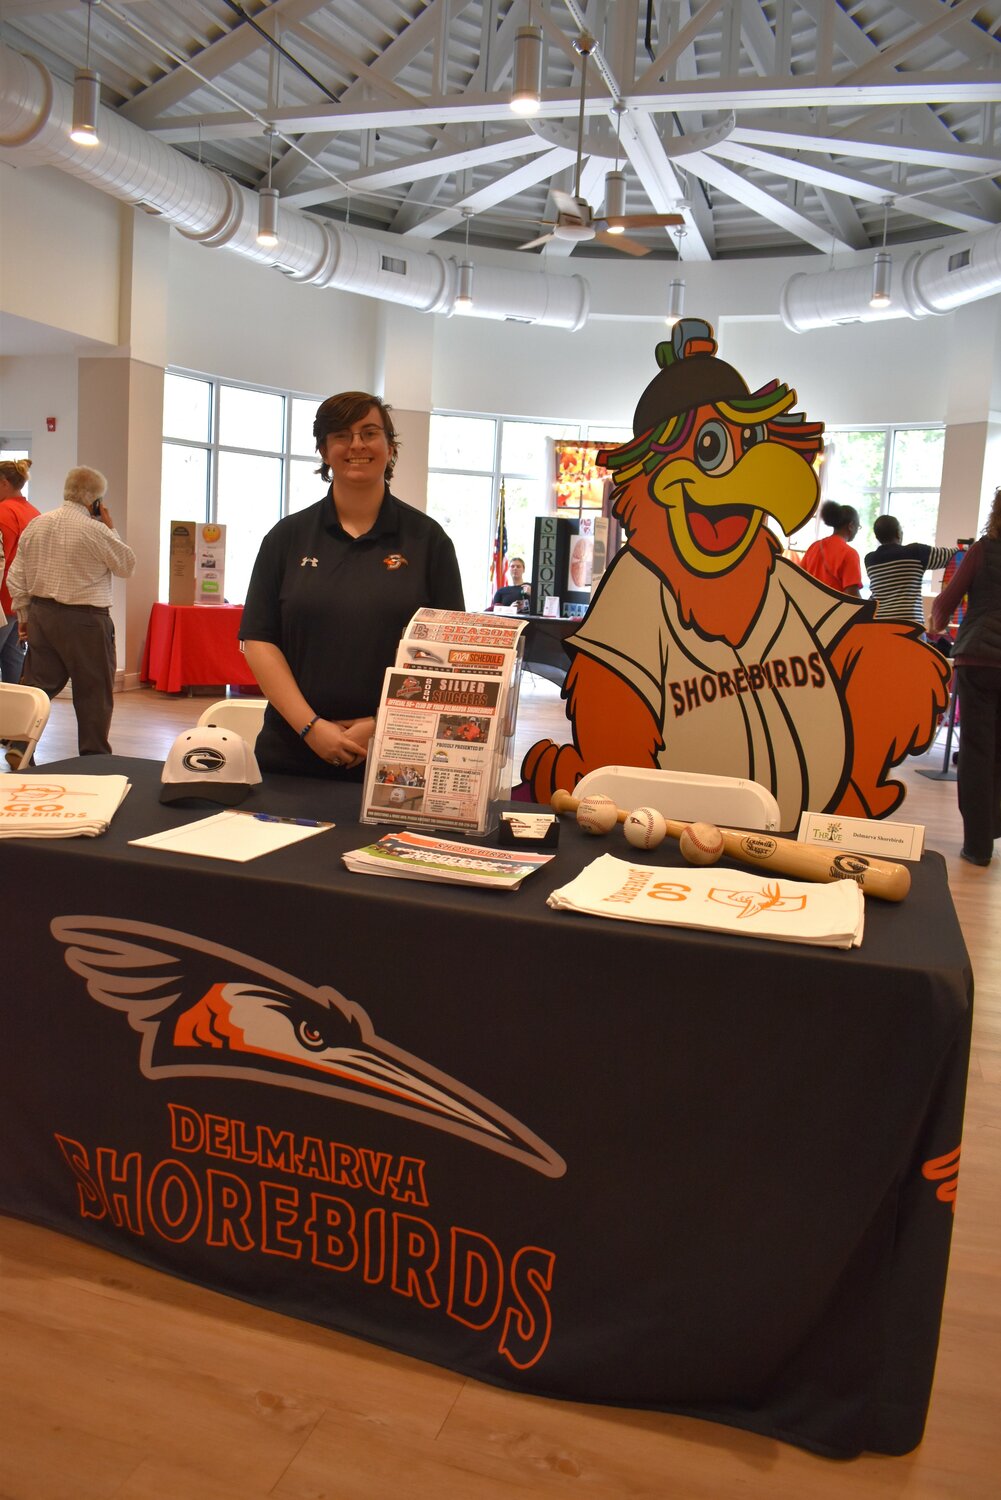 The Delmarva Shorebirds encouraged people to enjoy local attractions at Thrive Dorchester 2023, hosted by the Dorchester Banner at the Weinberg Intergenerational Center.